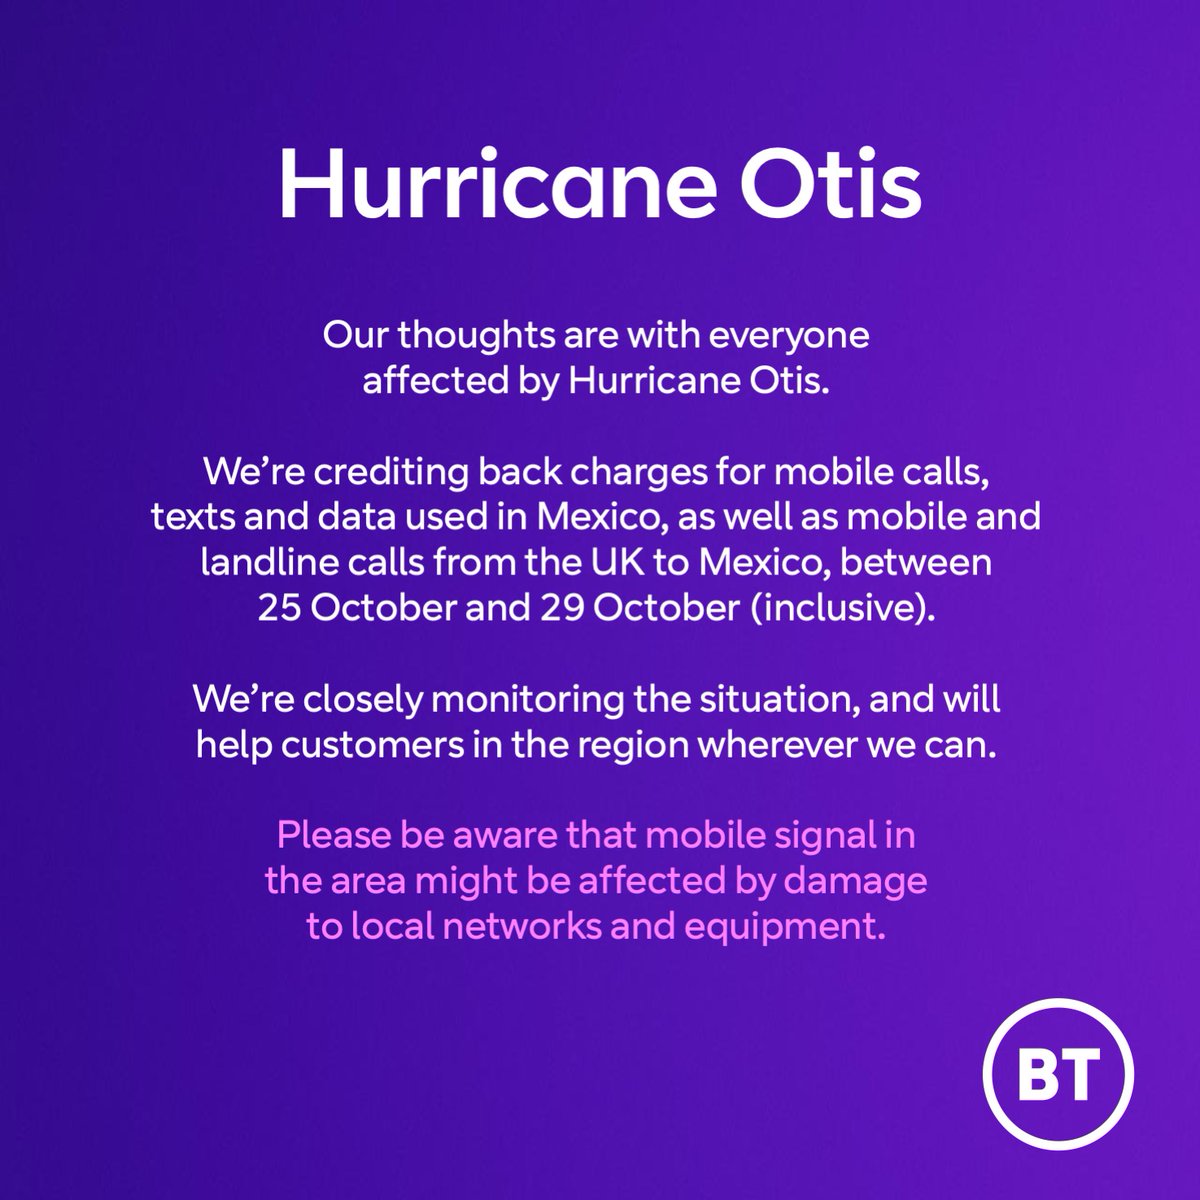 Our thoughts are with everyone affected by the devastating Hurricane Otis. We’re crediting back charges for mobile calls, texts and data used in Mexico, as well as mobile and landline calls from the UK to Mexico, between October 25 and October 29 (inclusive).